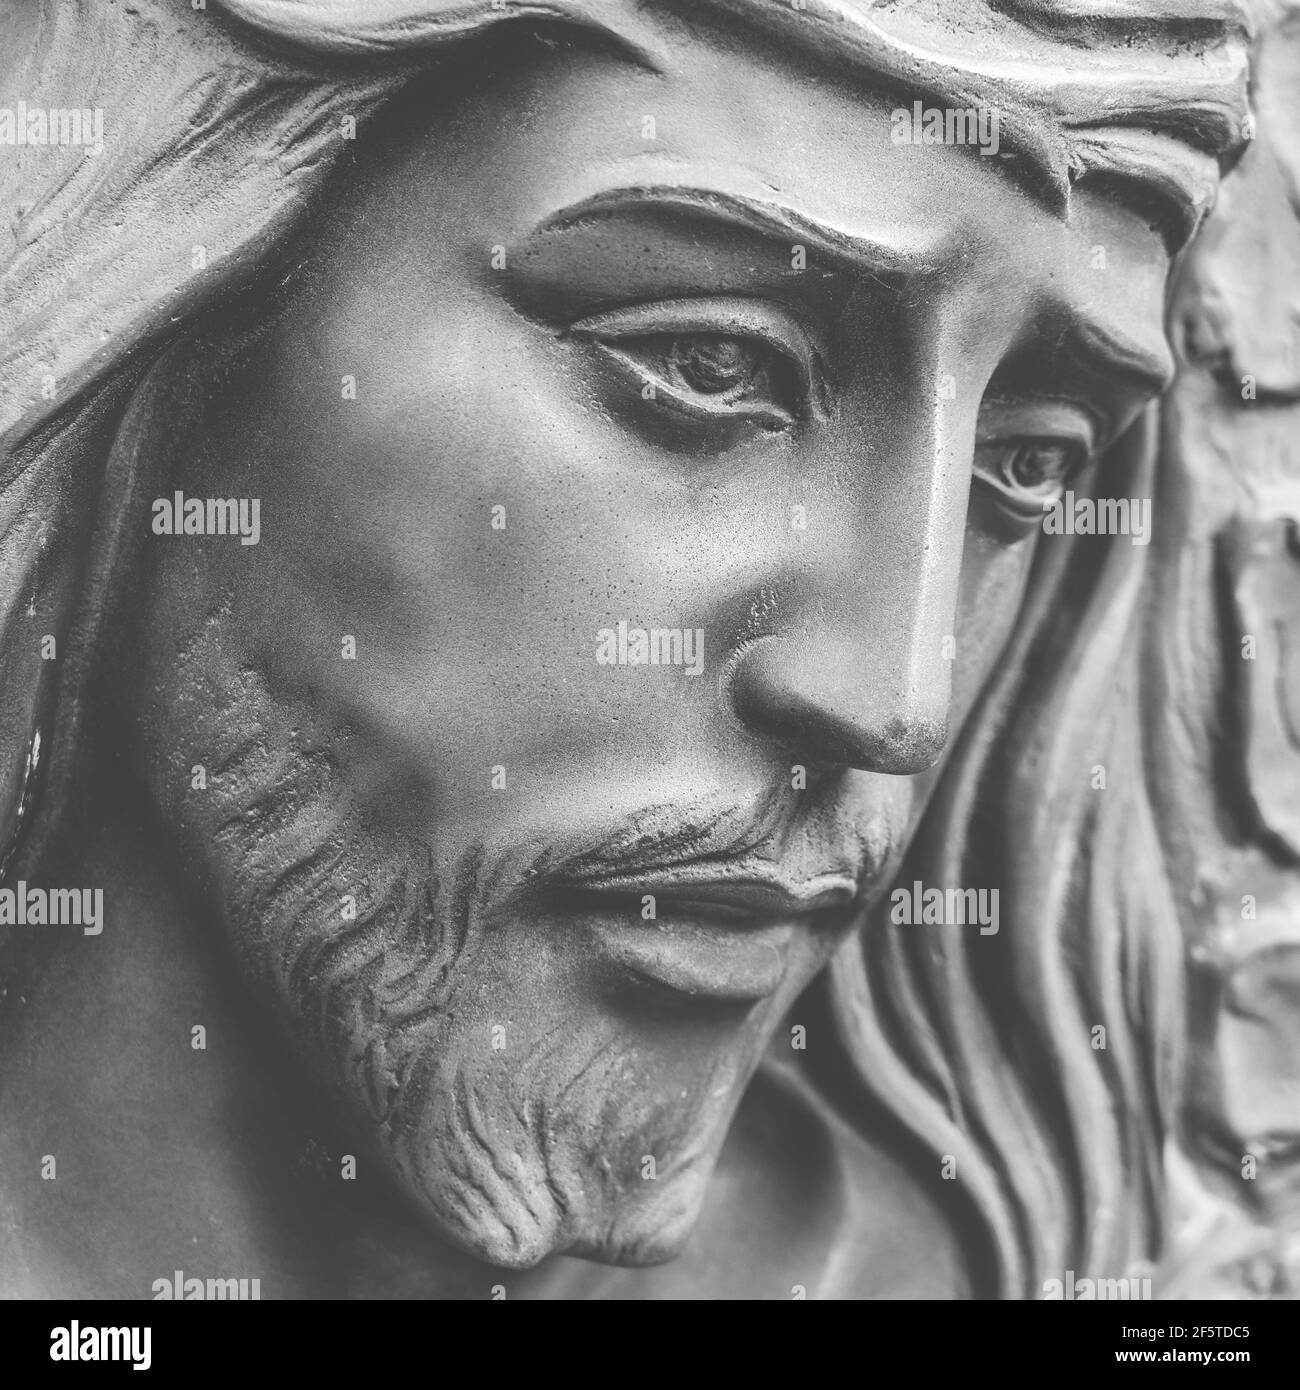 Statue of the face of jesus with a crown of thorns. Close-up. Ideal for concepts or events like Easter. Stock Photo